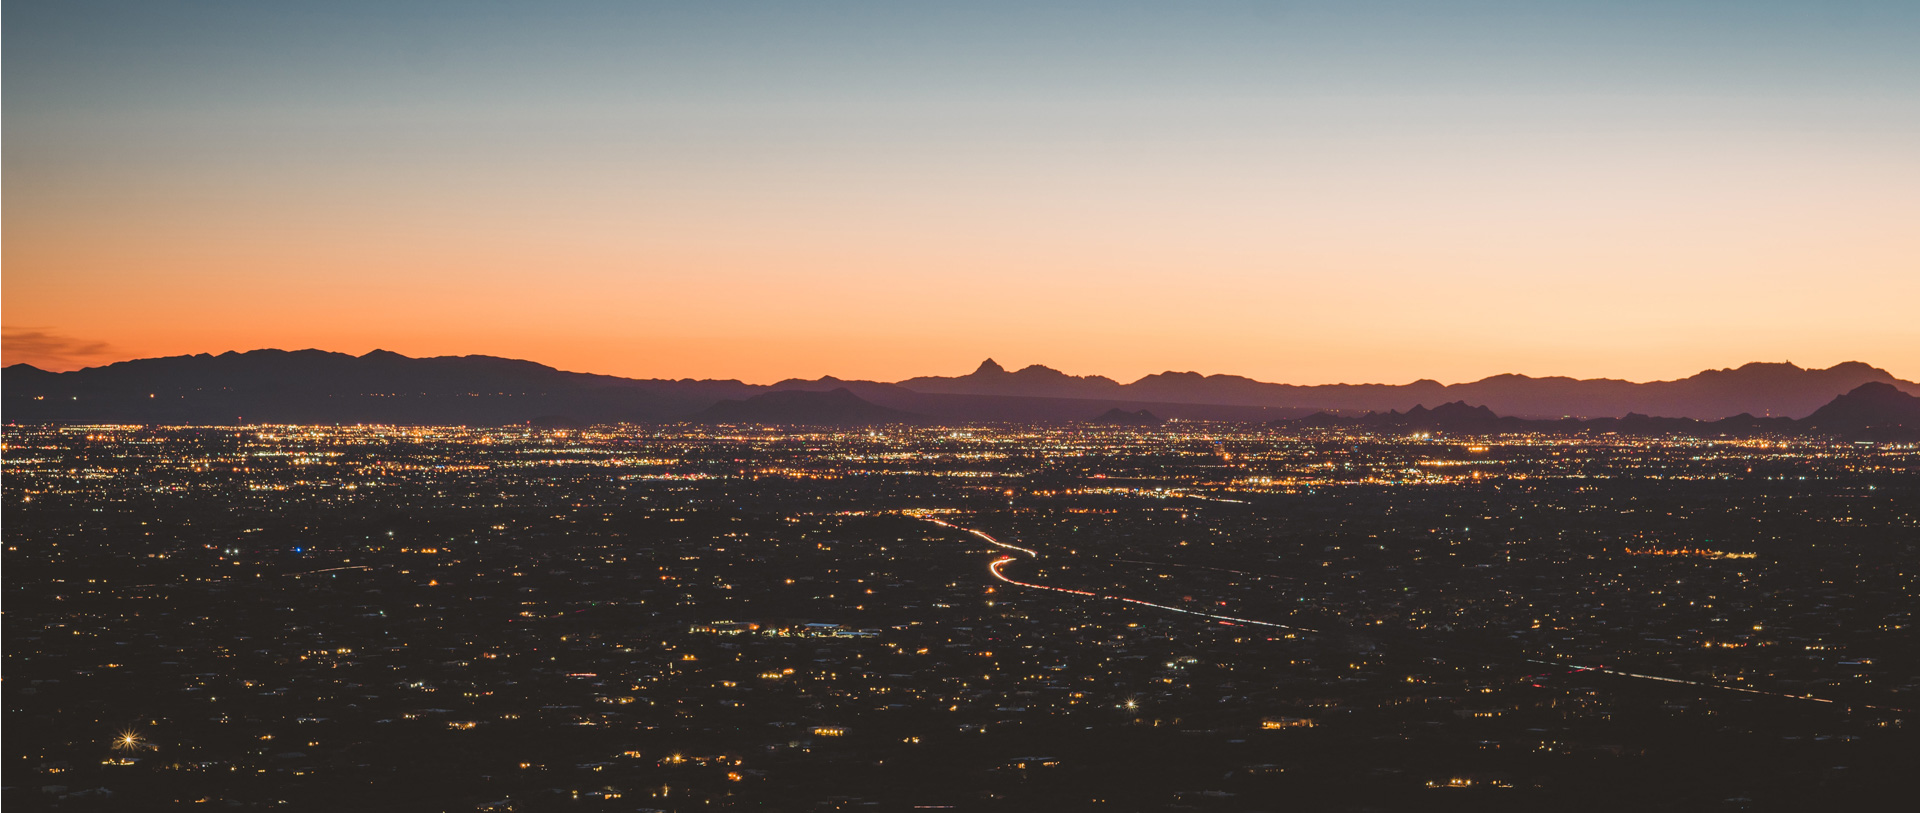 pictured: Tucson at night